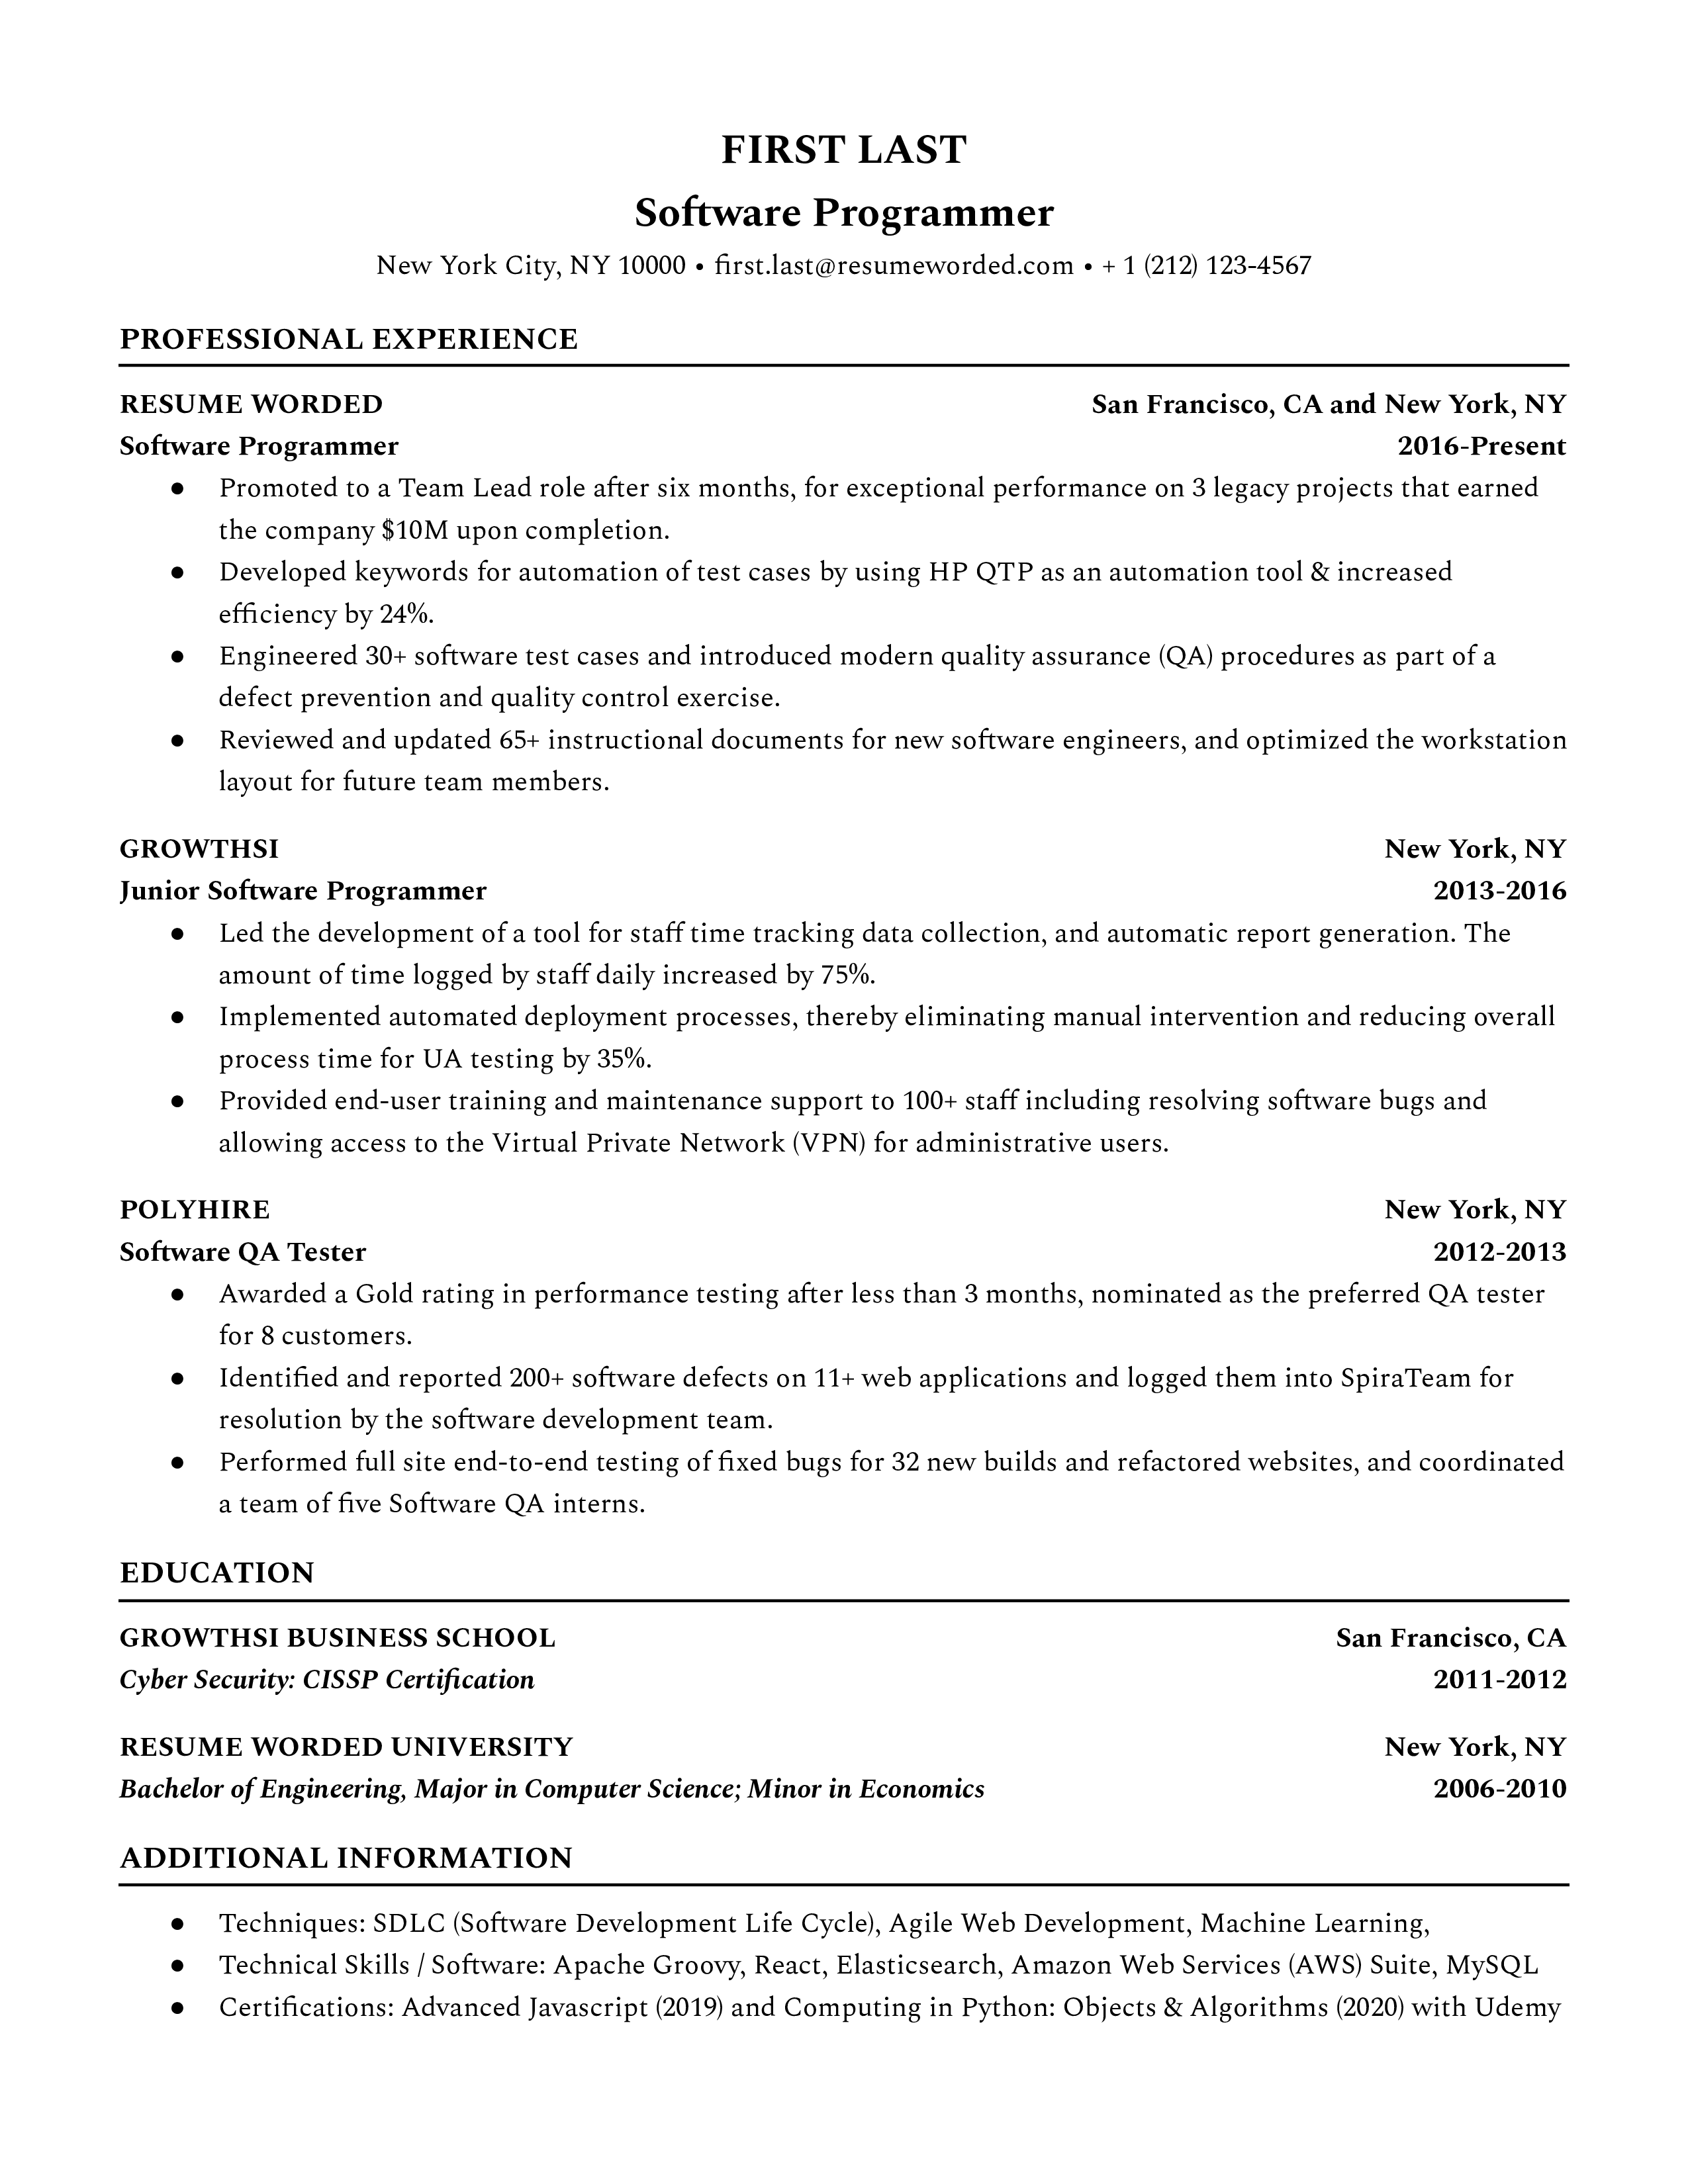 An organized software programmer's CV showcasing their skills, accomplishments, and projects.